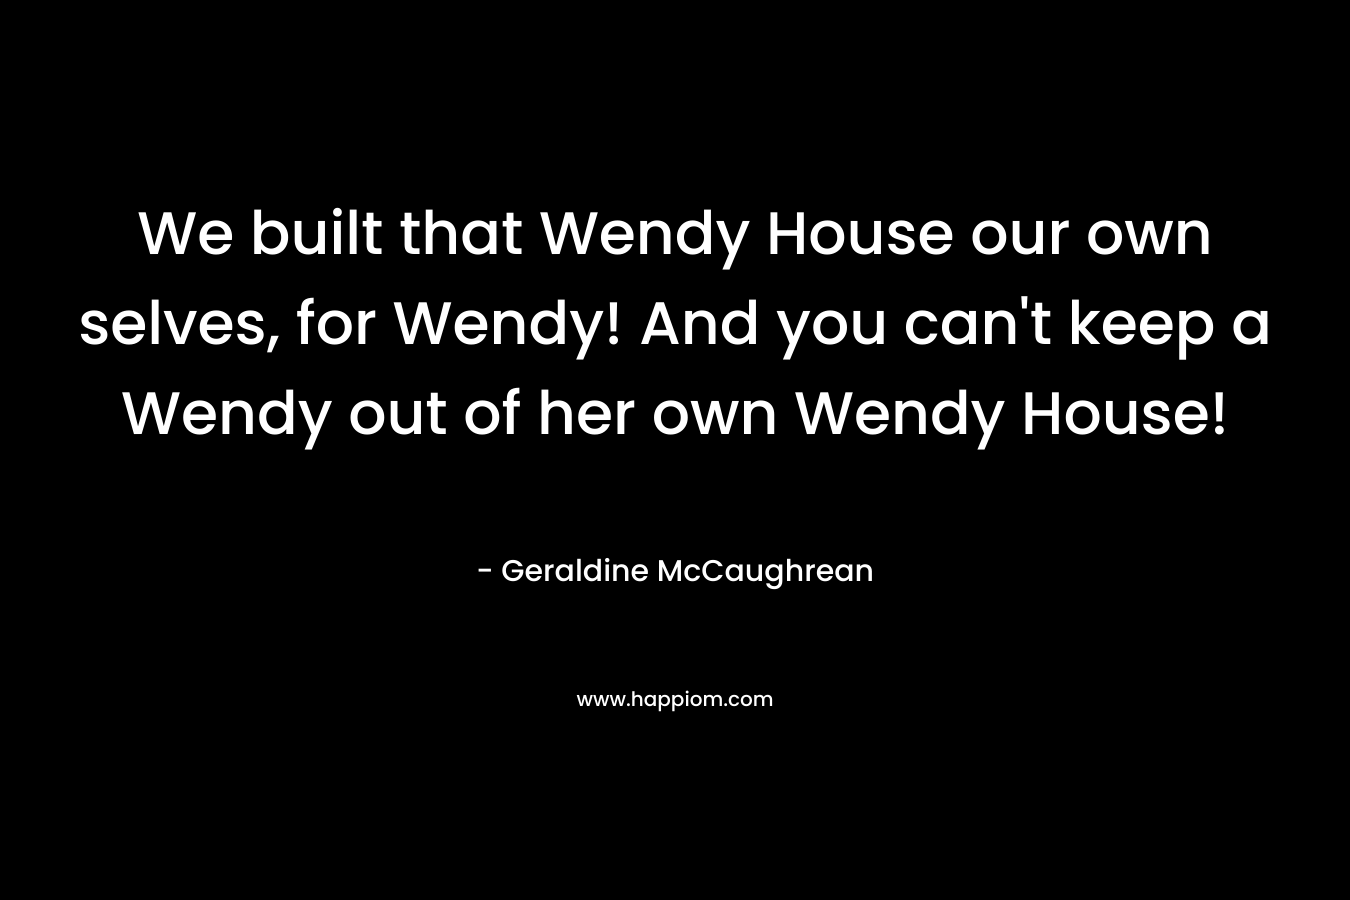 We built that Wendy House our own selves, for Wendy! And you can't keep a Wendy out of her own Wendy House!